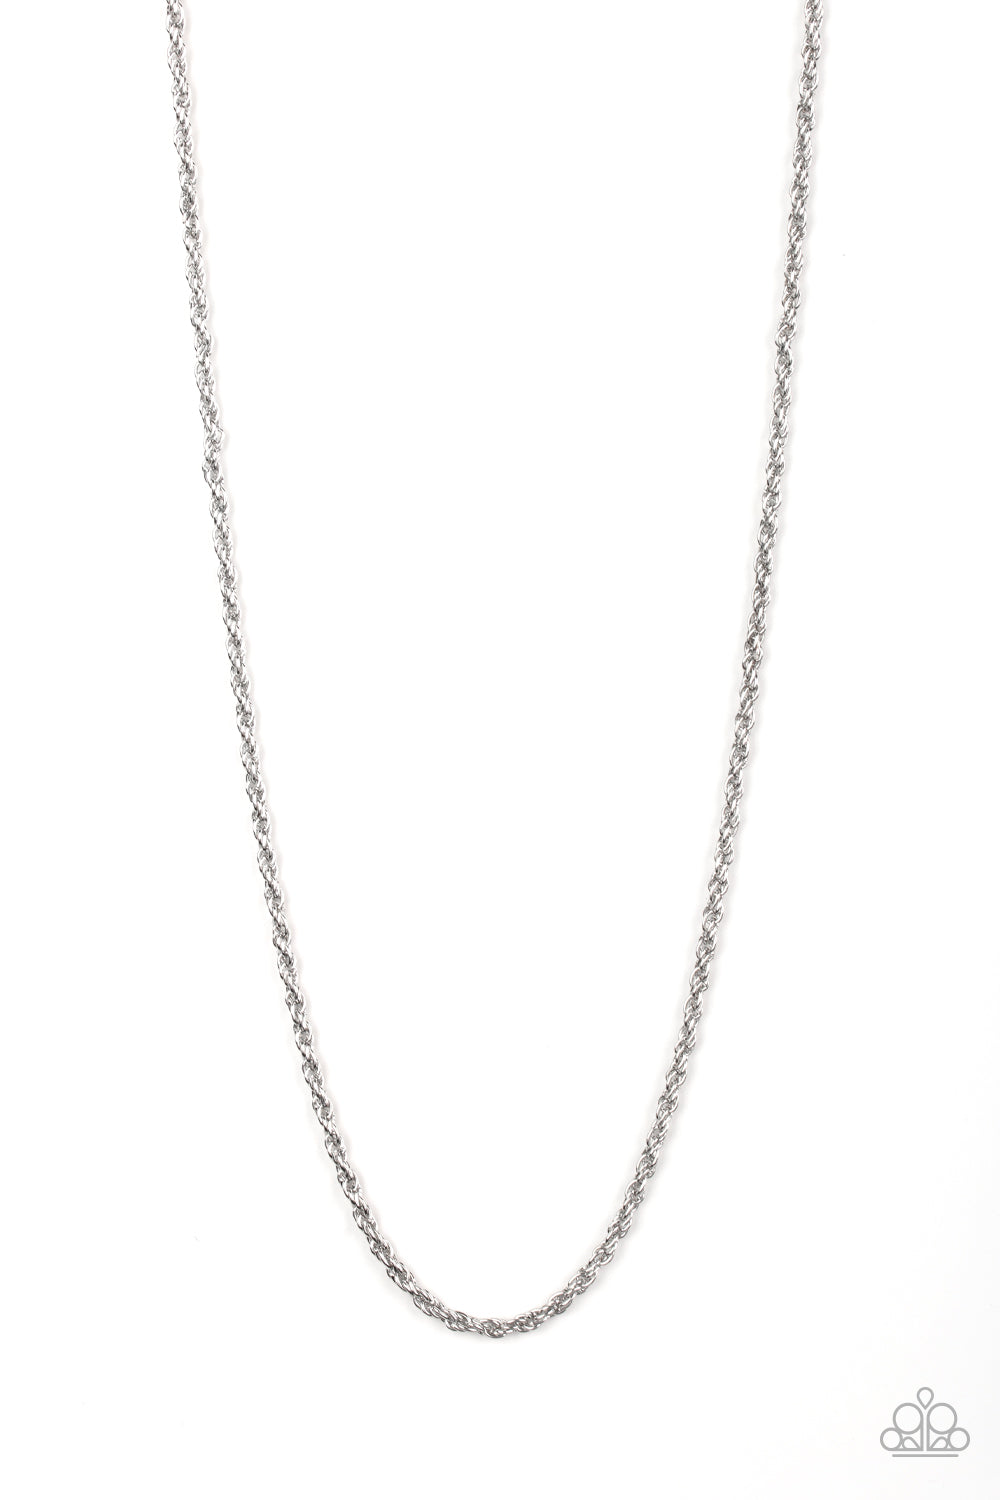 The Go-To Guy - Silver Urban Necklace